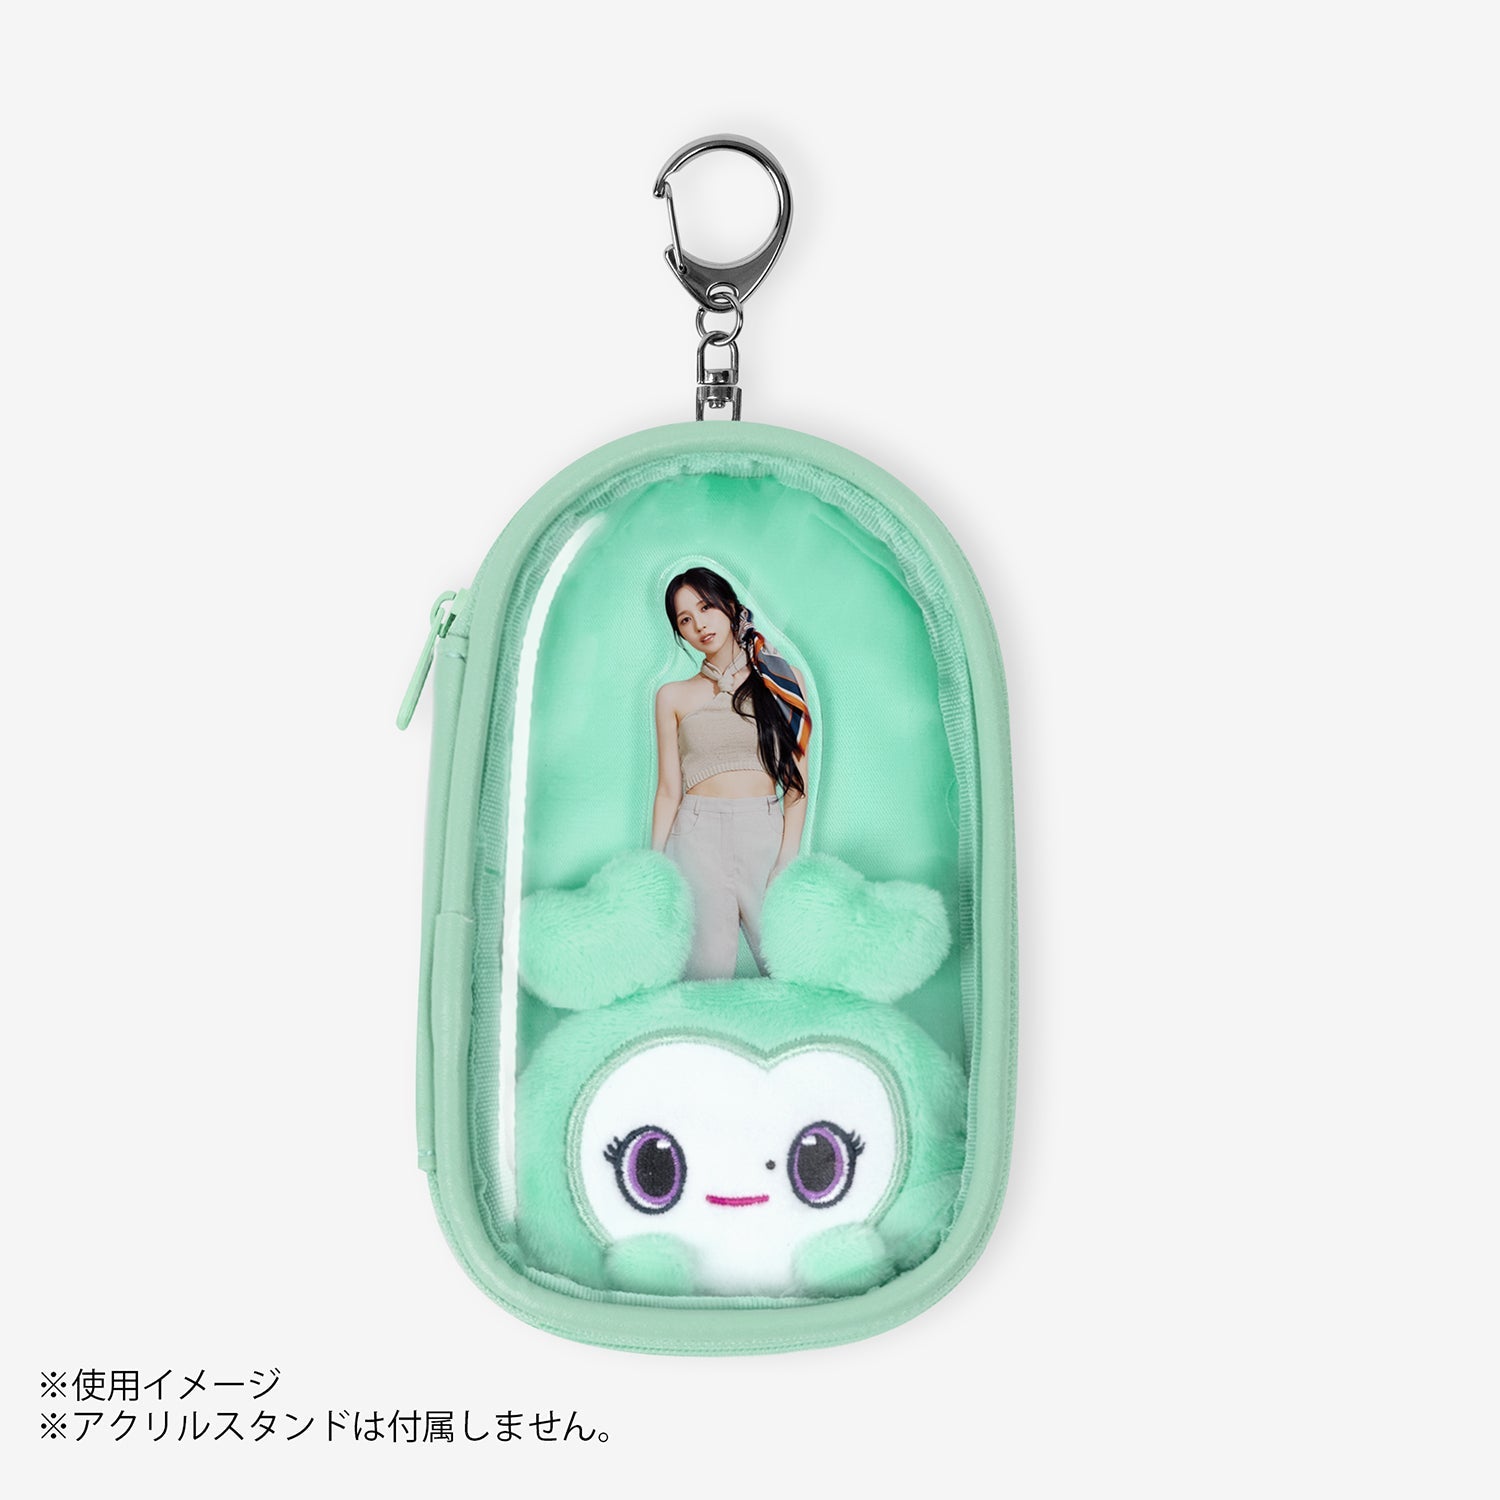 TWICE LOVELYS ACRYLIC STAND POUCH - MIVELY / TWICE『READY TO BE SPECIAL』